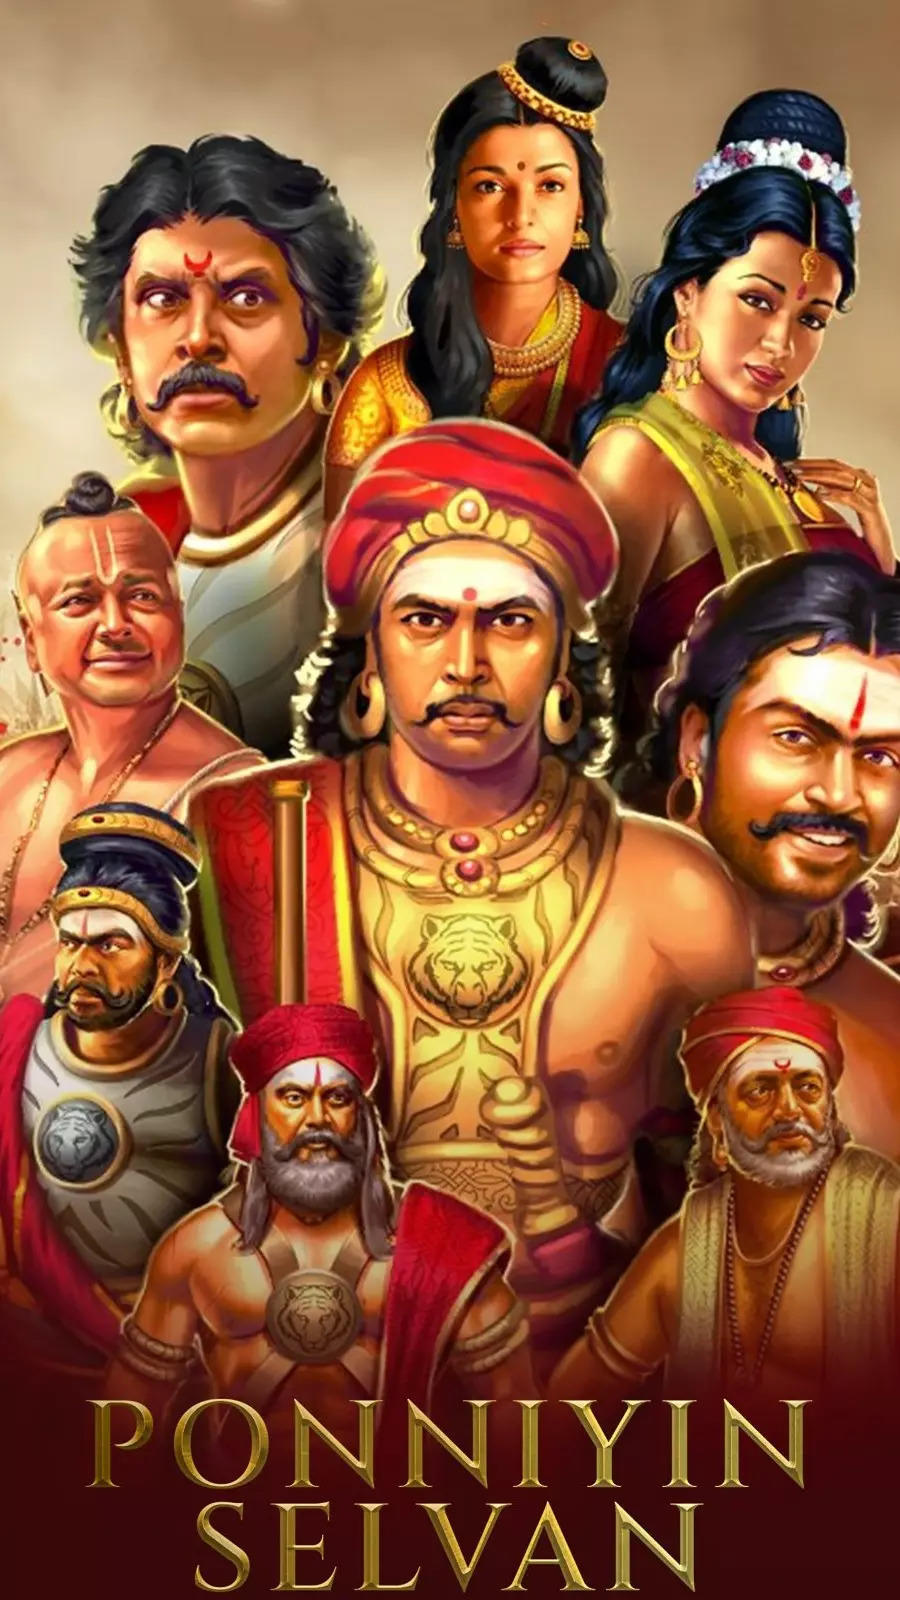 Ponniyin Selvan Impressive Looks From The Movie Times Of India